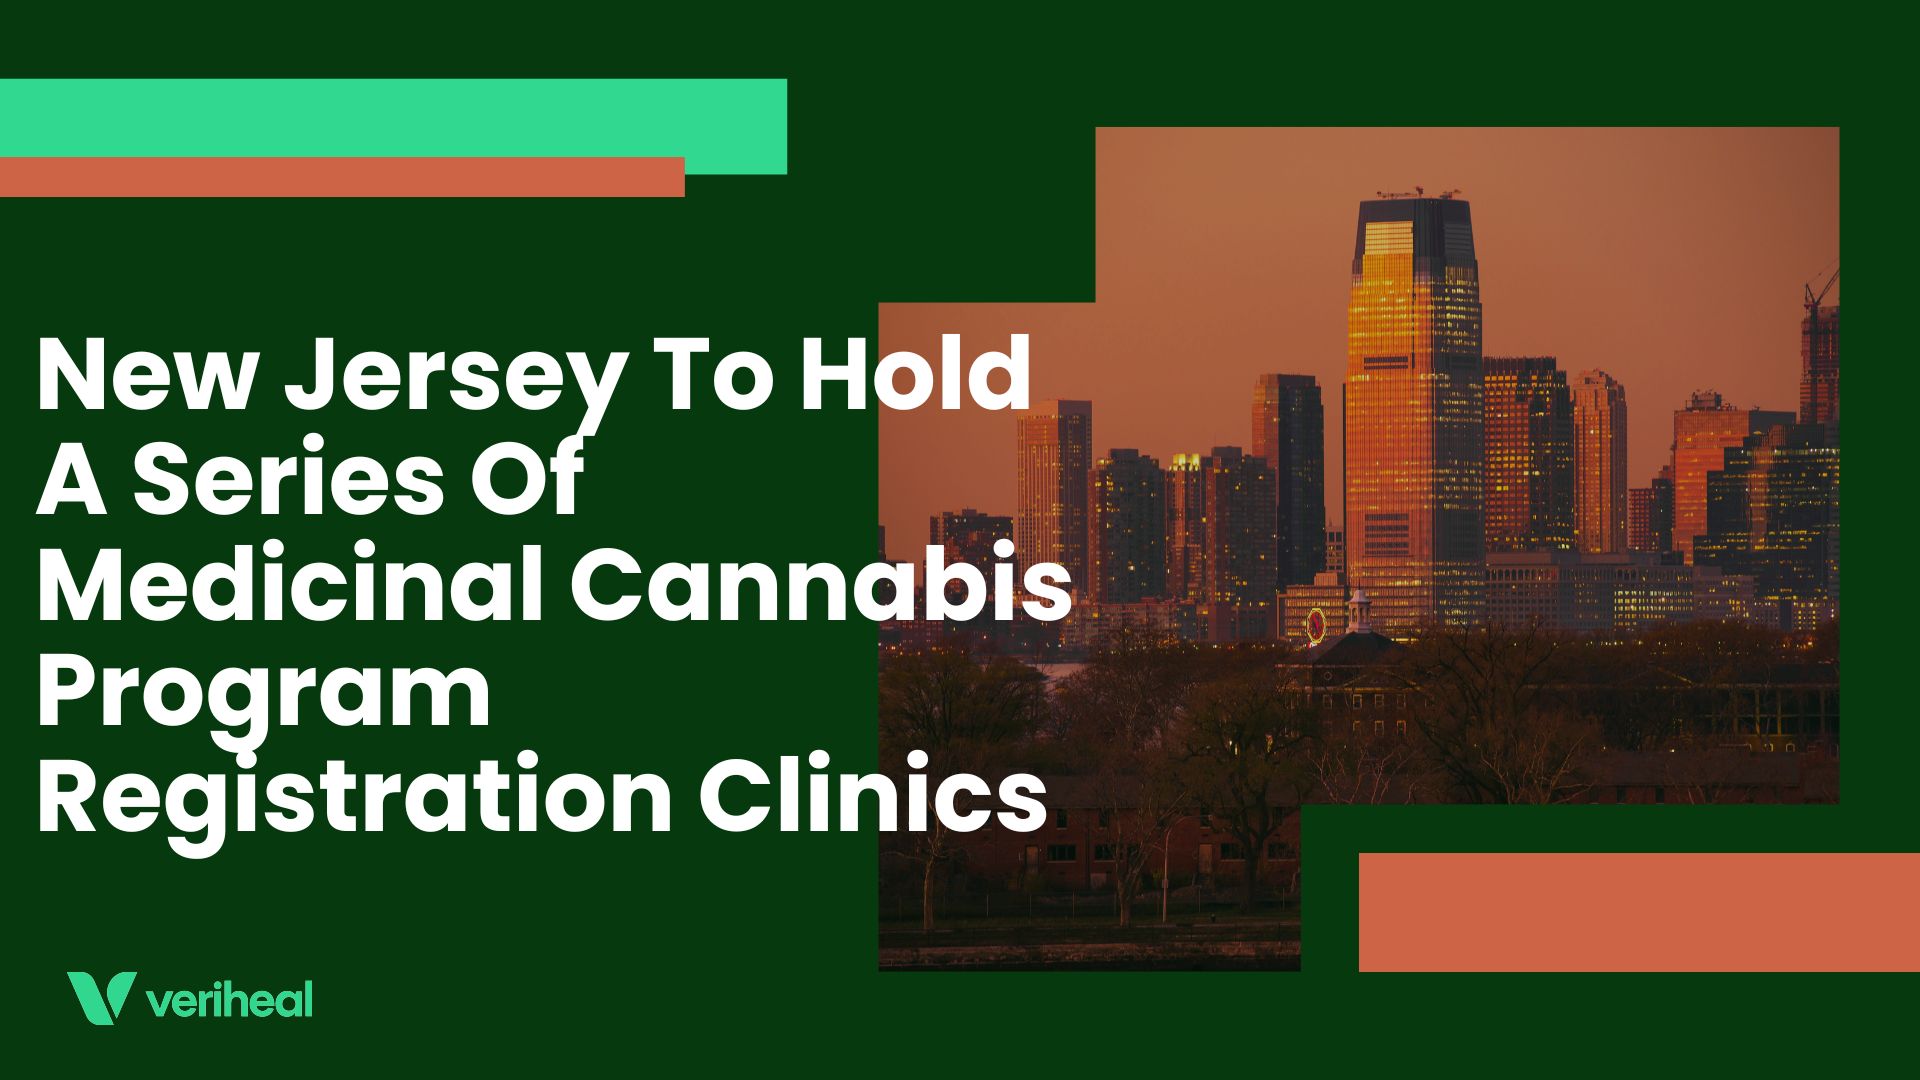 New Jersey To Hold A Series Of Medicinal Cannabis Program Registration Clinics